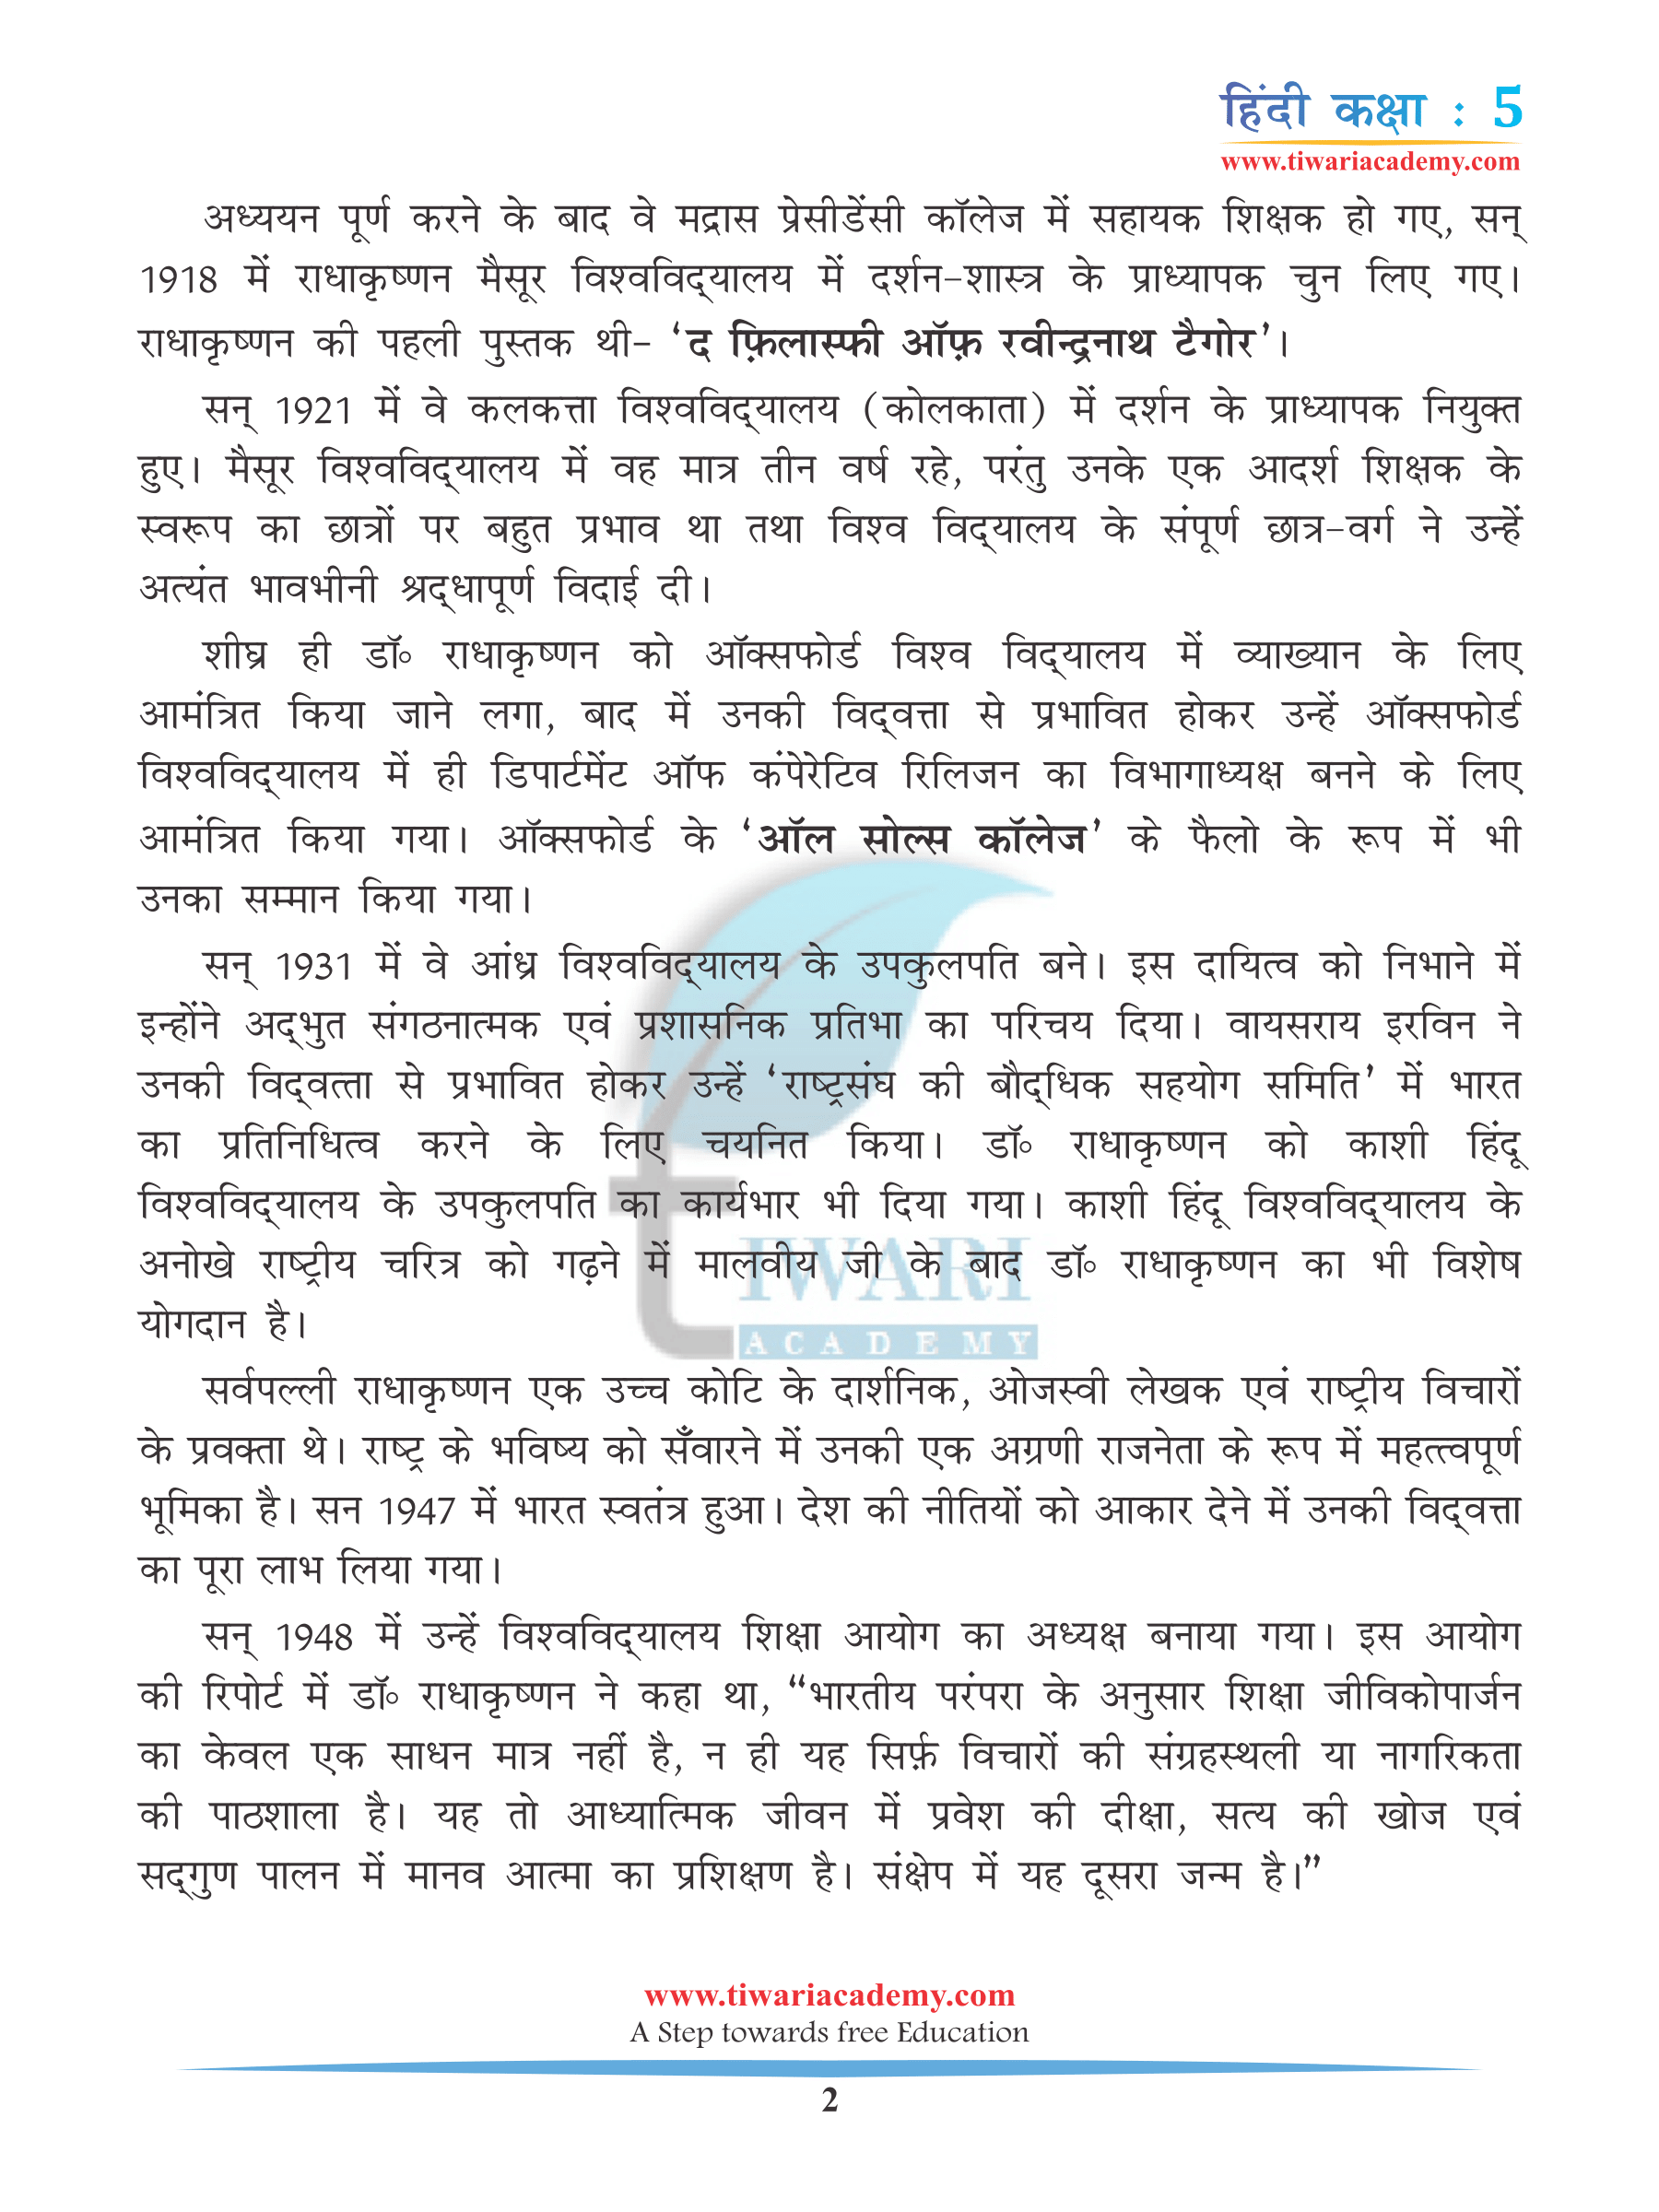 NCERT Class 5 Hindi Chapter 7 Question Answers